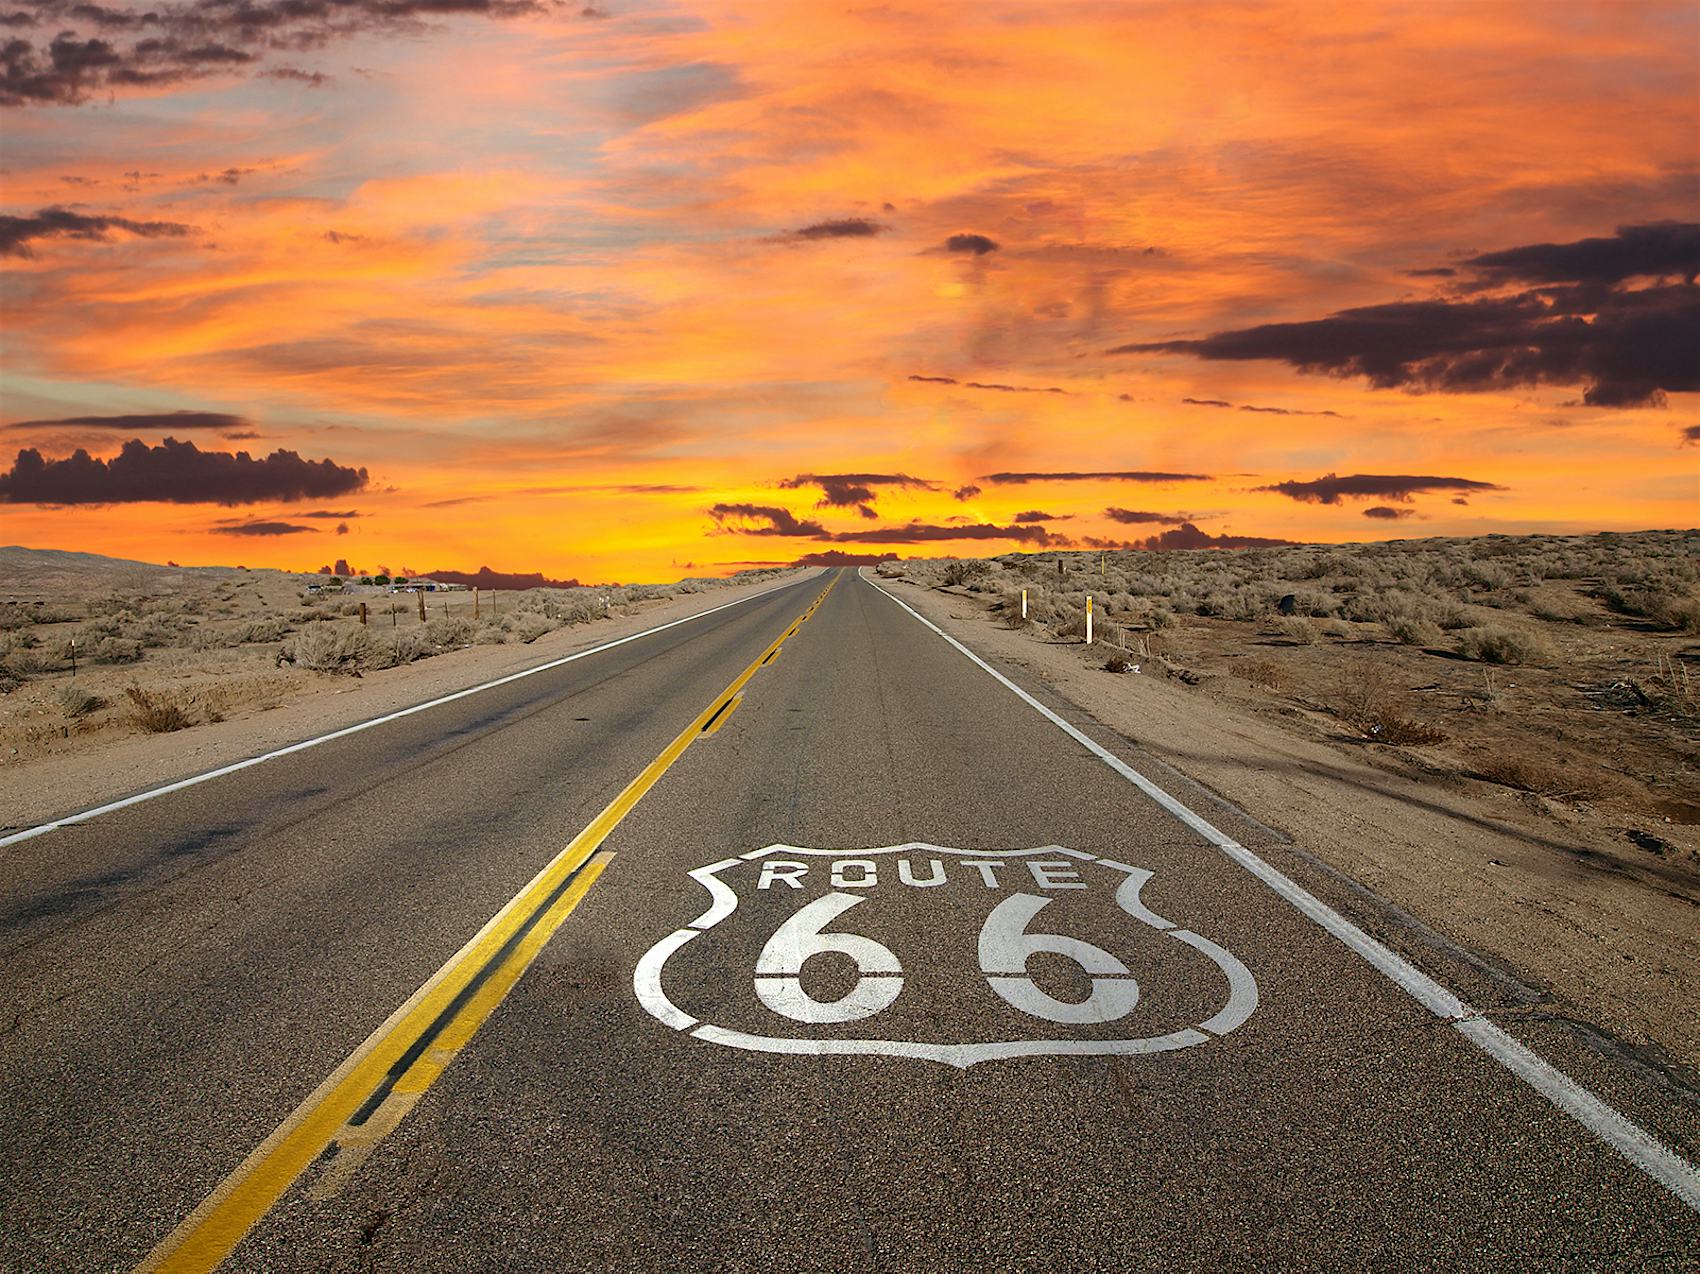 Historic Route 66 runs from Chicago to Los Angeles, with epic stops along the way 